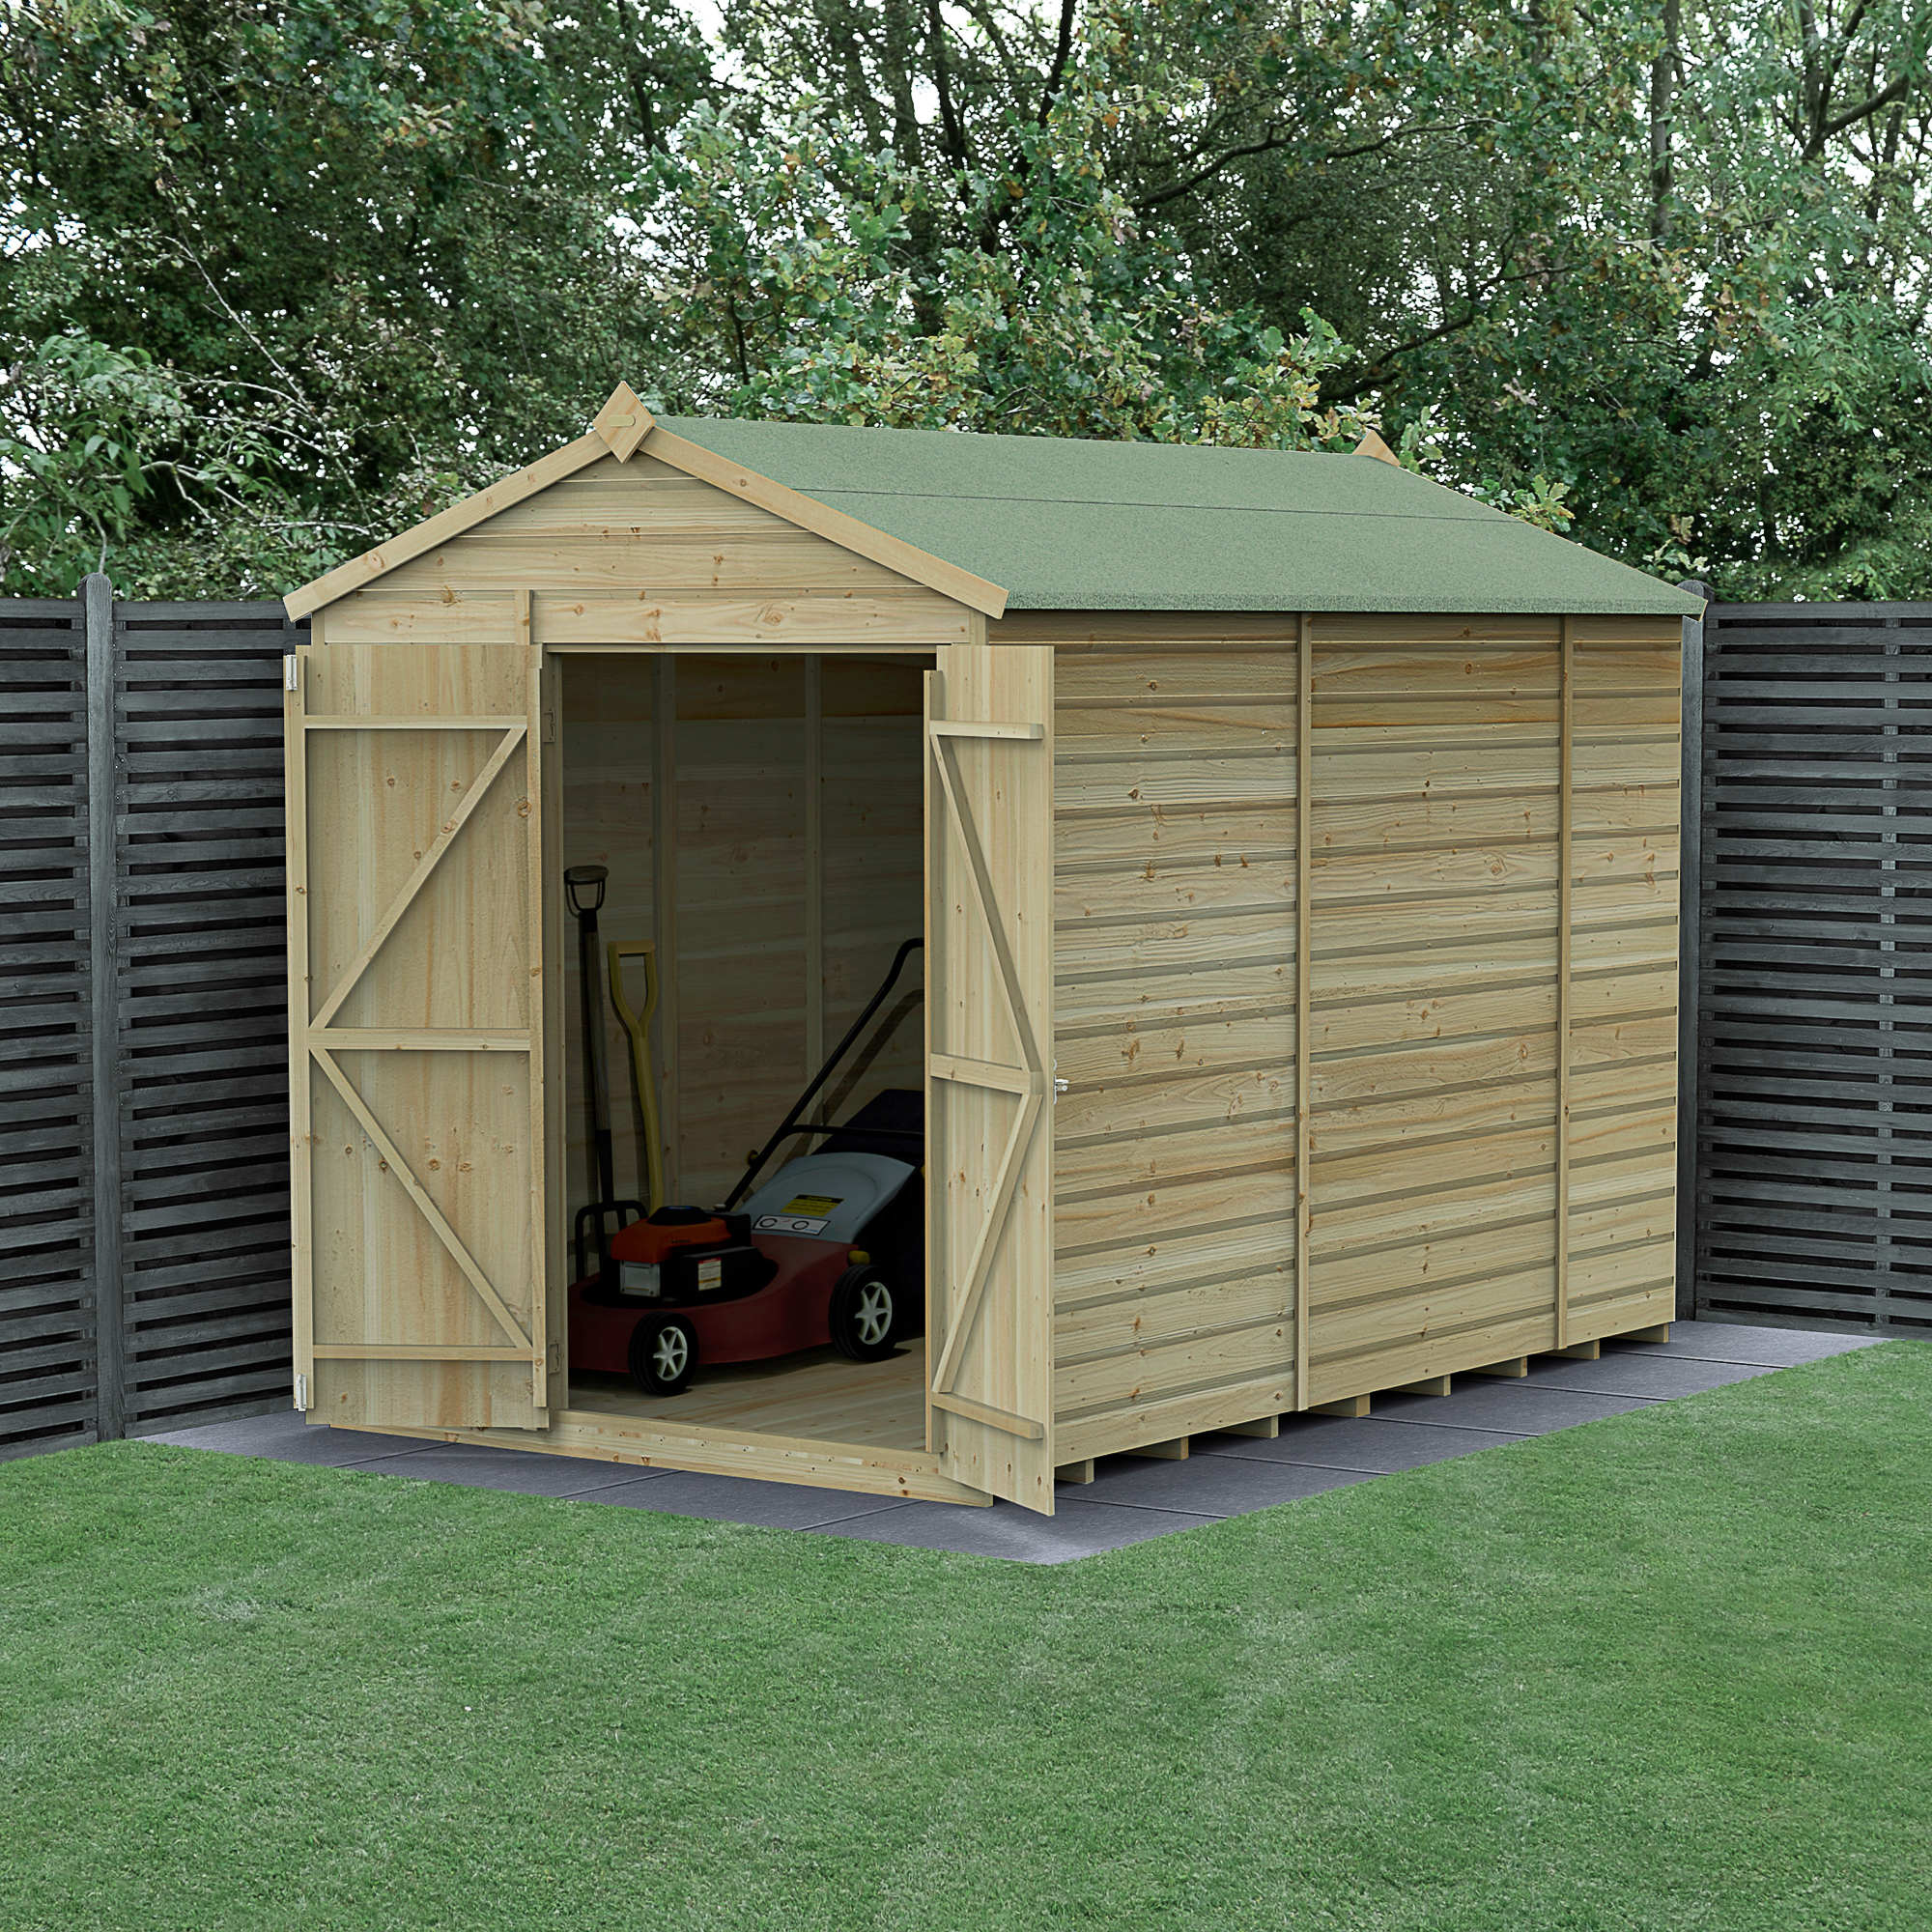 Forest Garden Beckwood 6 x 10ft Apex Shiplap Pressure Treated Double Door Windowless Shed with Base